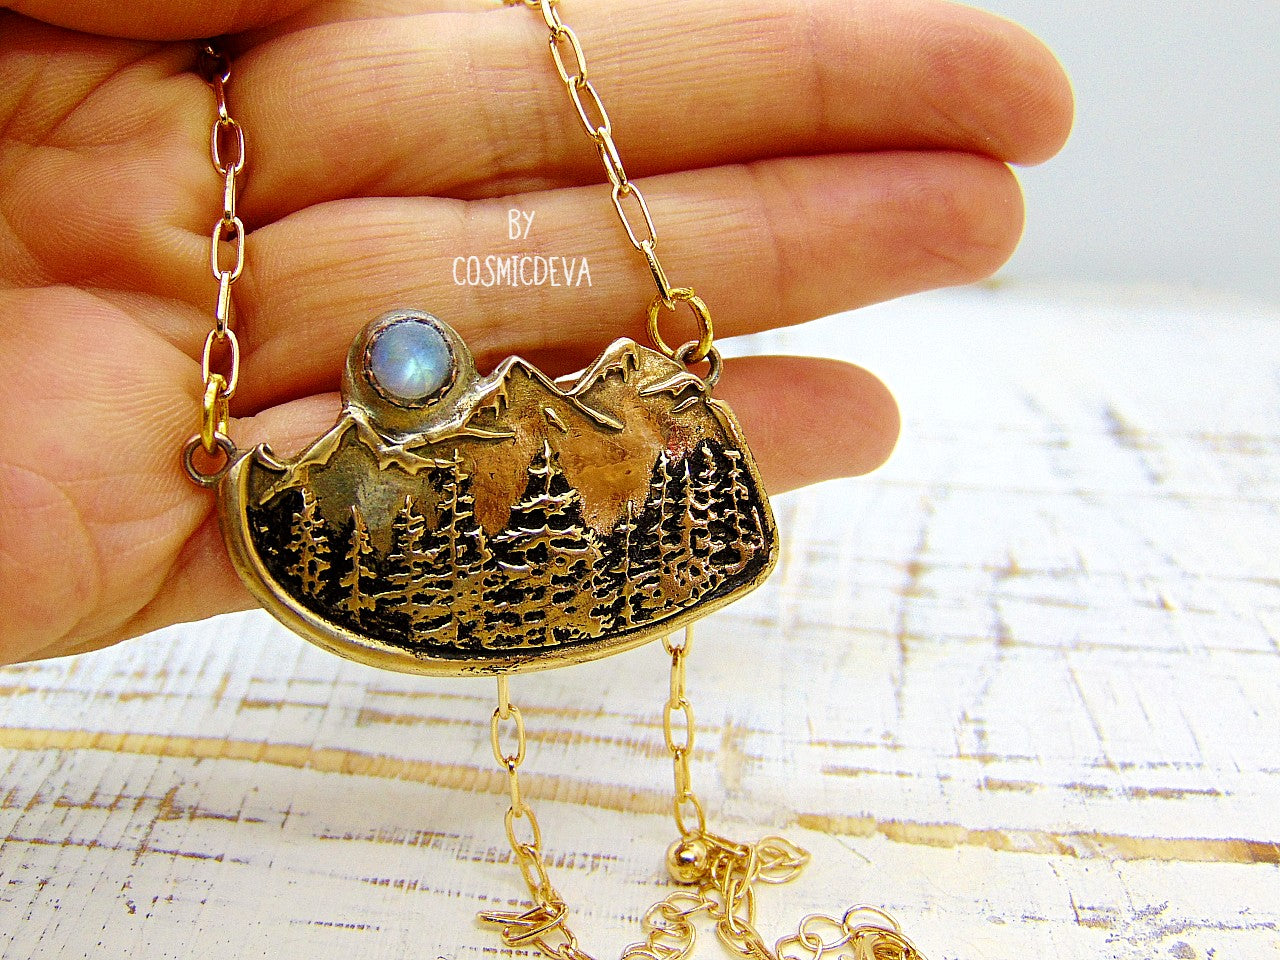 This nature lover landscape pendant necklace features the serenity of a pine forest in the enchanted wilderness of the deep woods with majestic mountains in the background. A flashy rainbow moonstone setting represents a full moon that rises above the top of the mountains. The scenery reminds of the beautiful alpine landscape of Switzerland as well as the great Rocky Mountains.